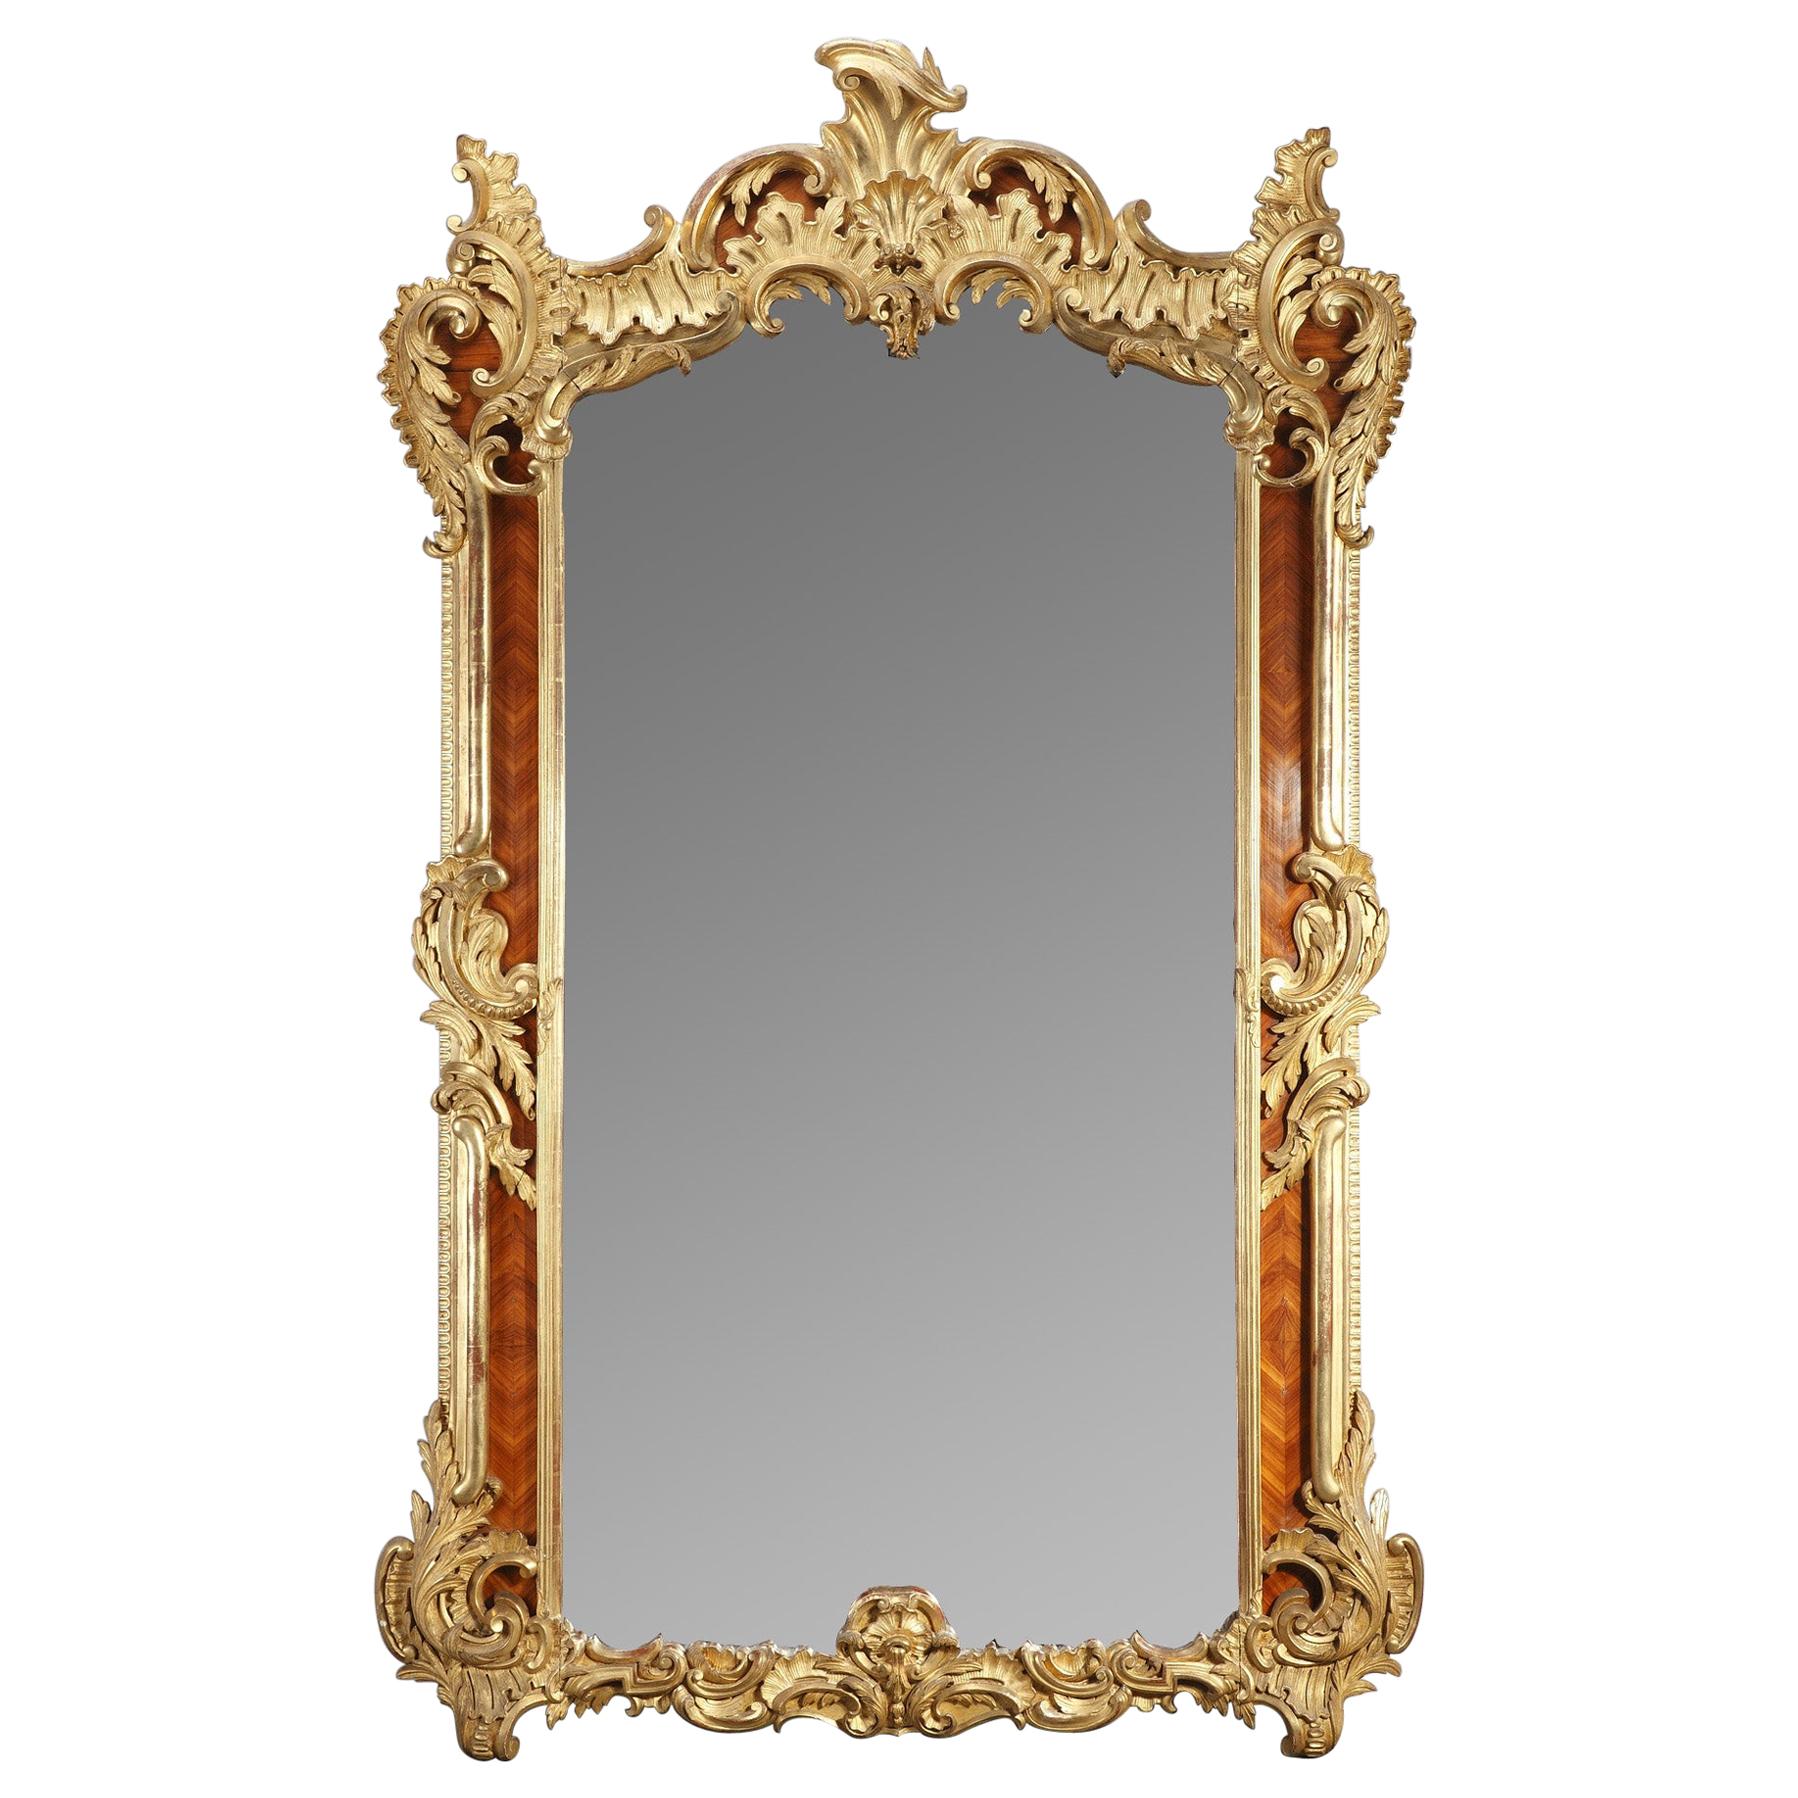 Very Large Louis XV-Style Revival Giltwood Mirror